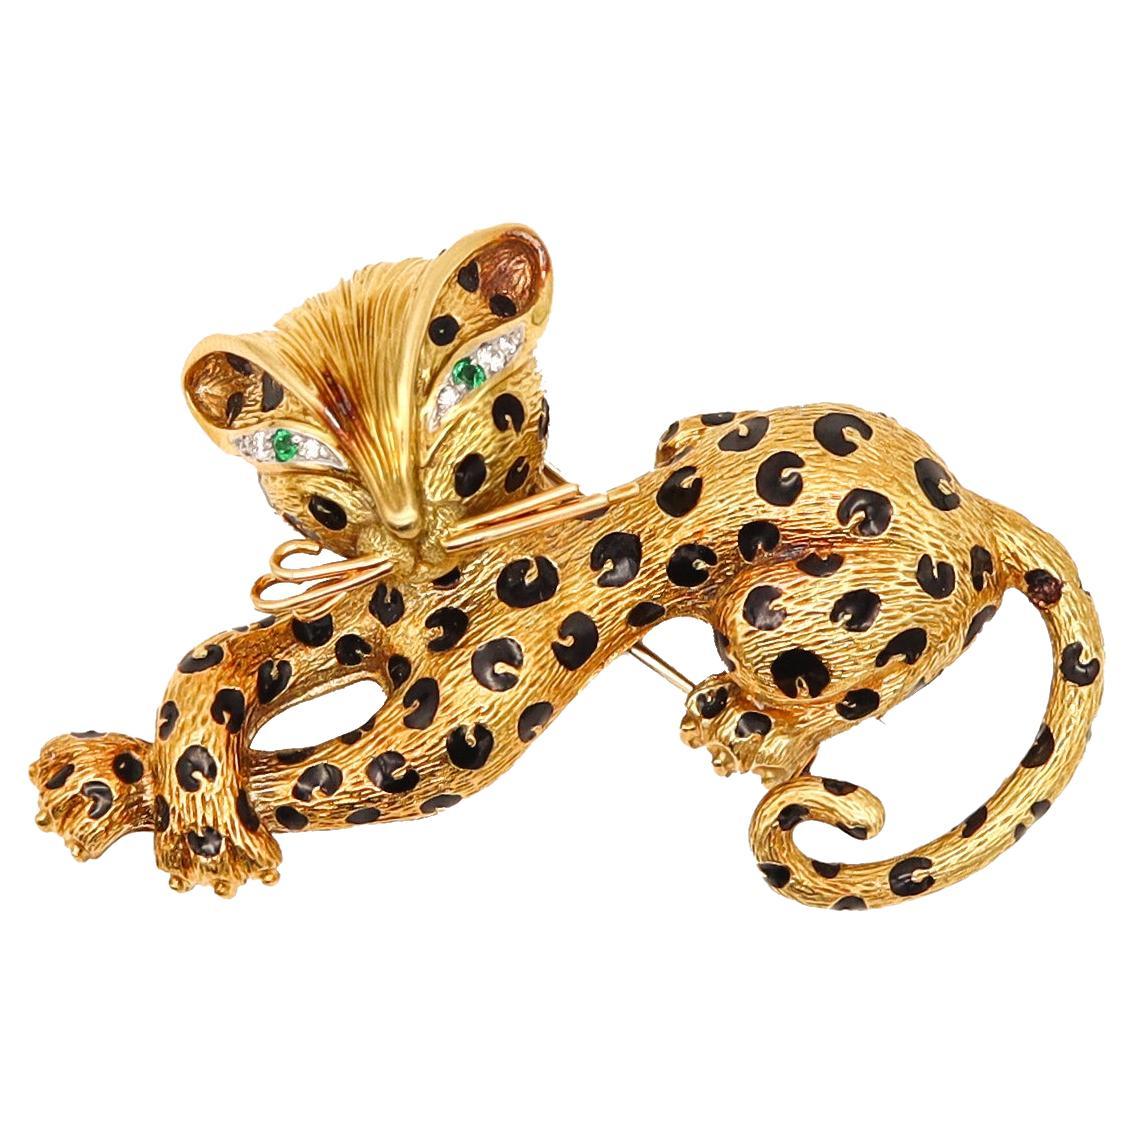 Fred of Paris 1970 Enamel Sauvage Cat Brooch 18k Gold with Diamonds & Emeralds For Sale